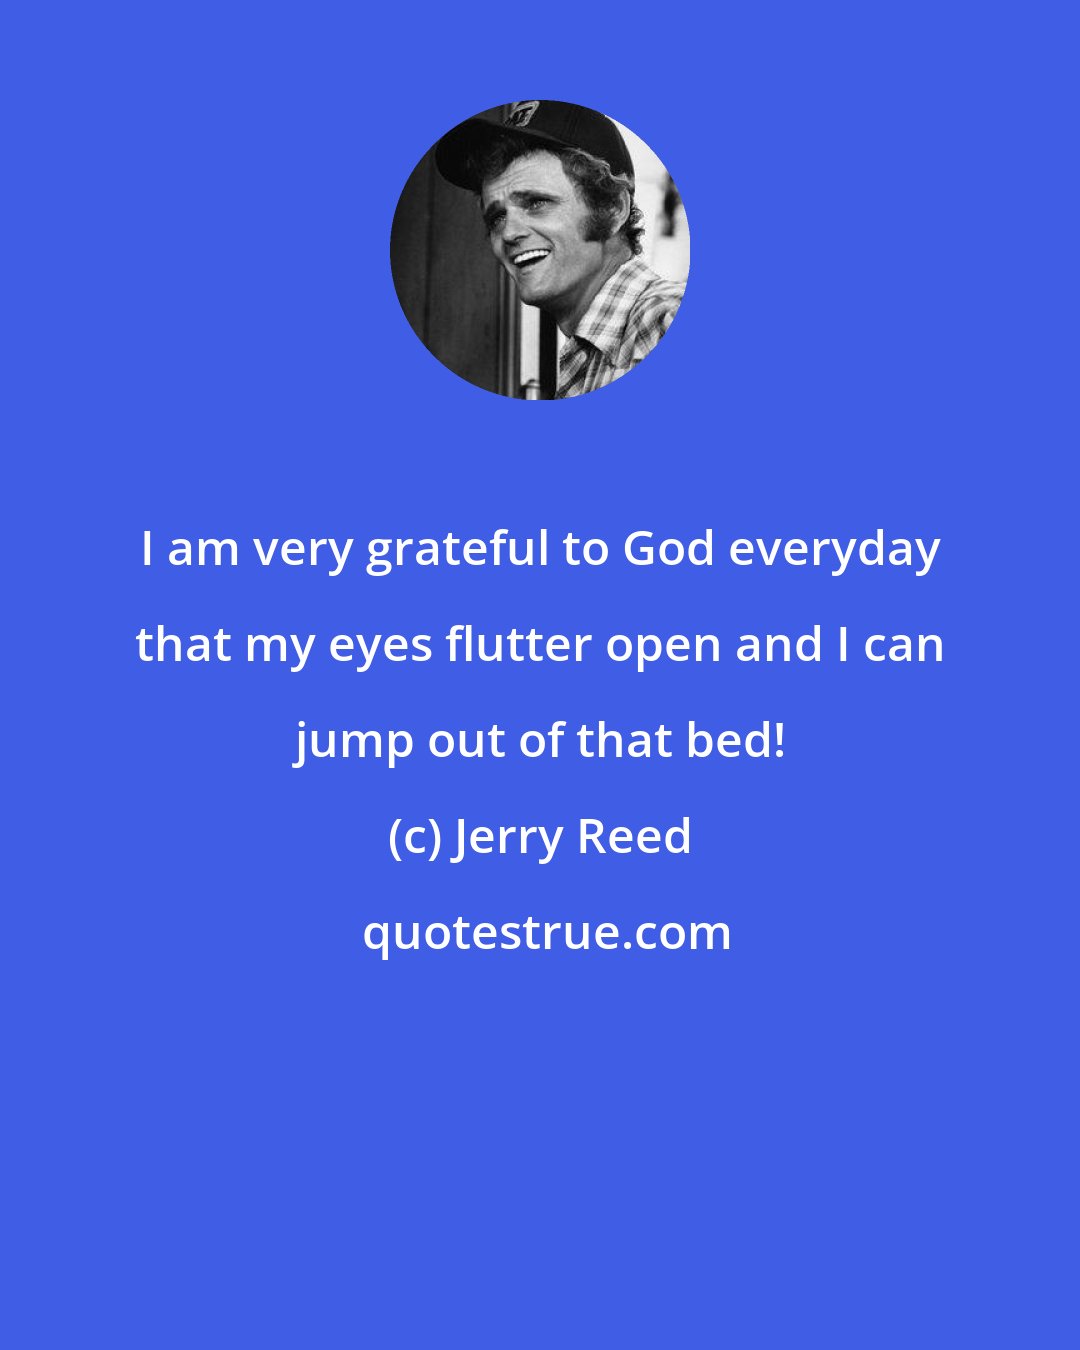 Jerry Reed: I am very grateful to God everyday that my eyes flutter open and I can jump out of that bed!